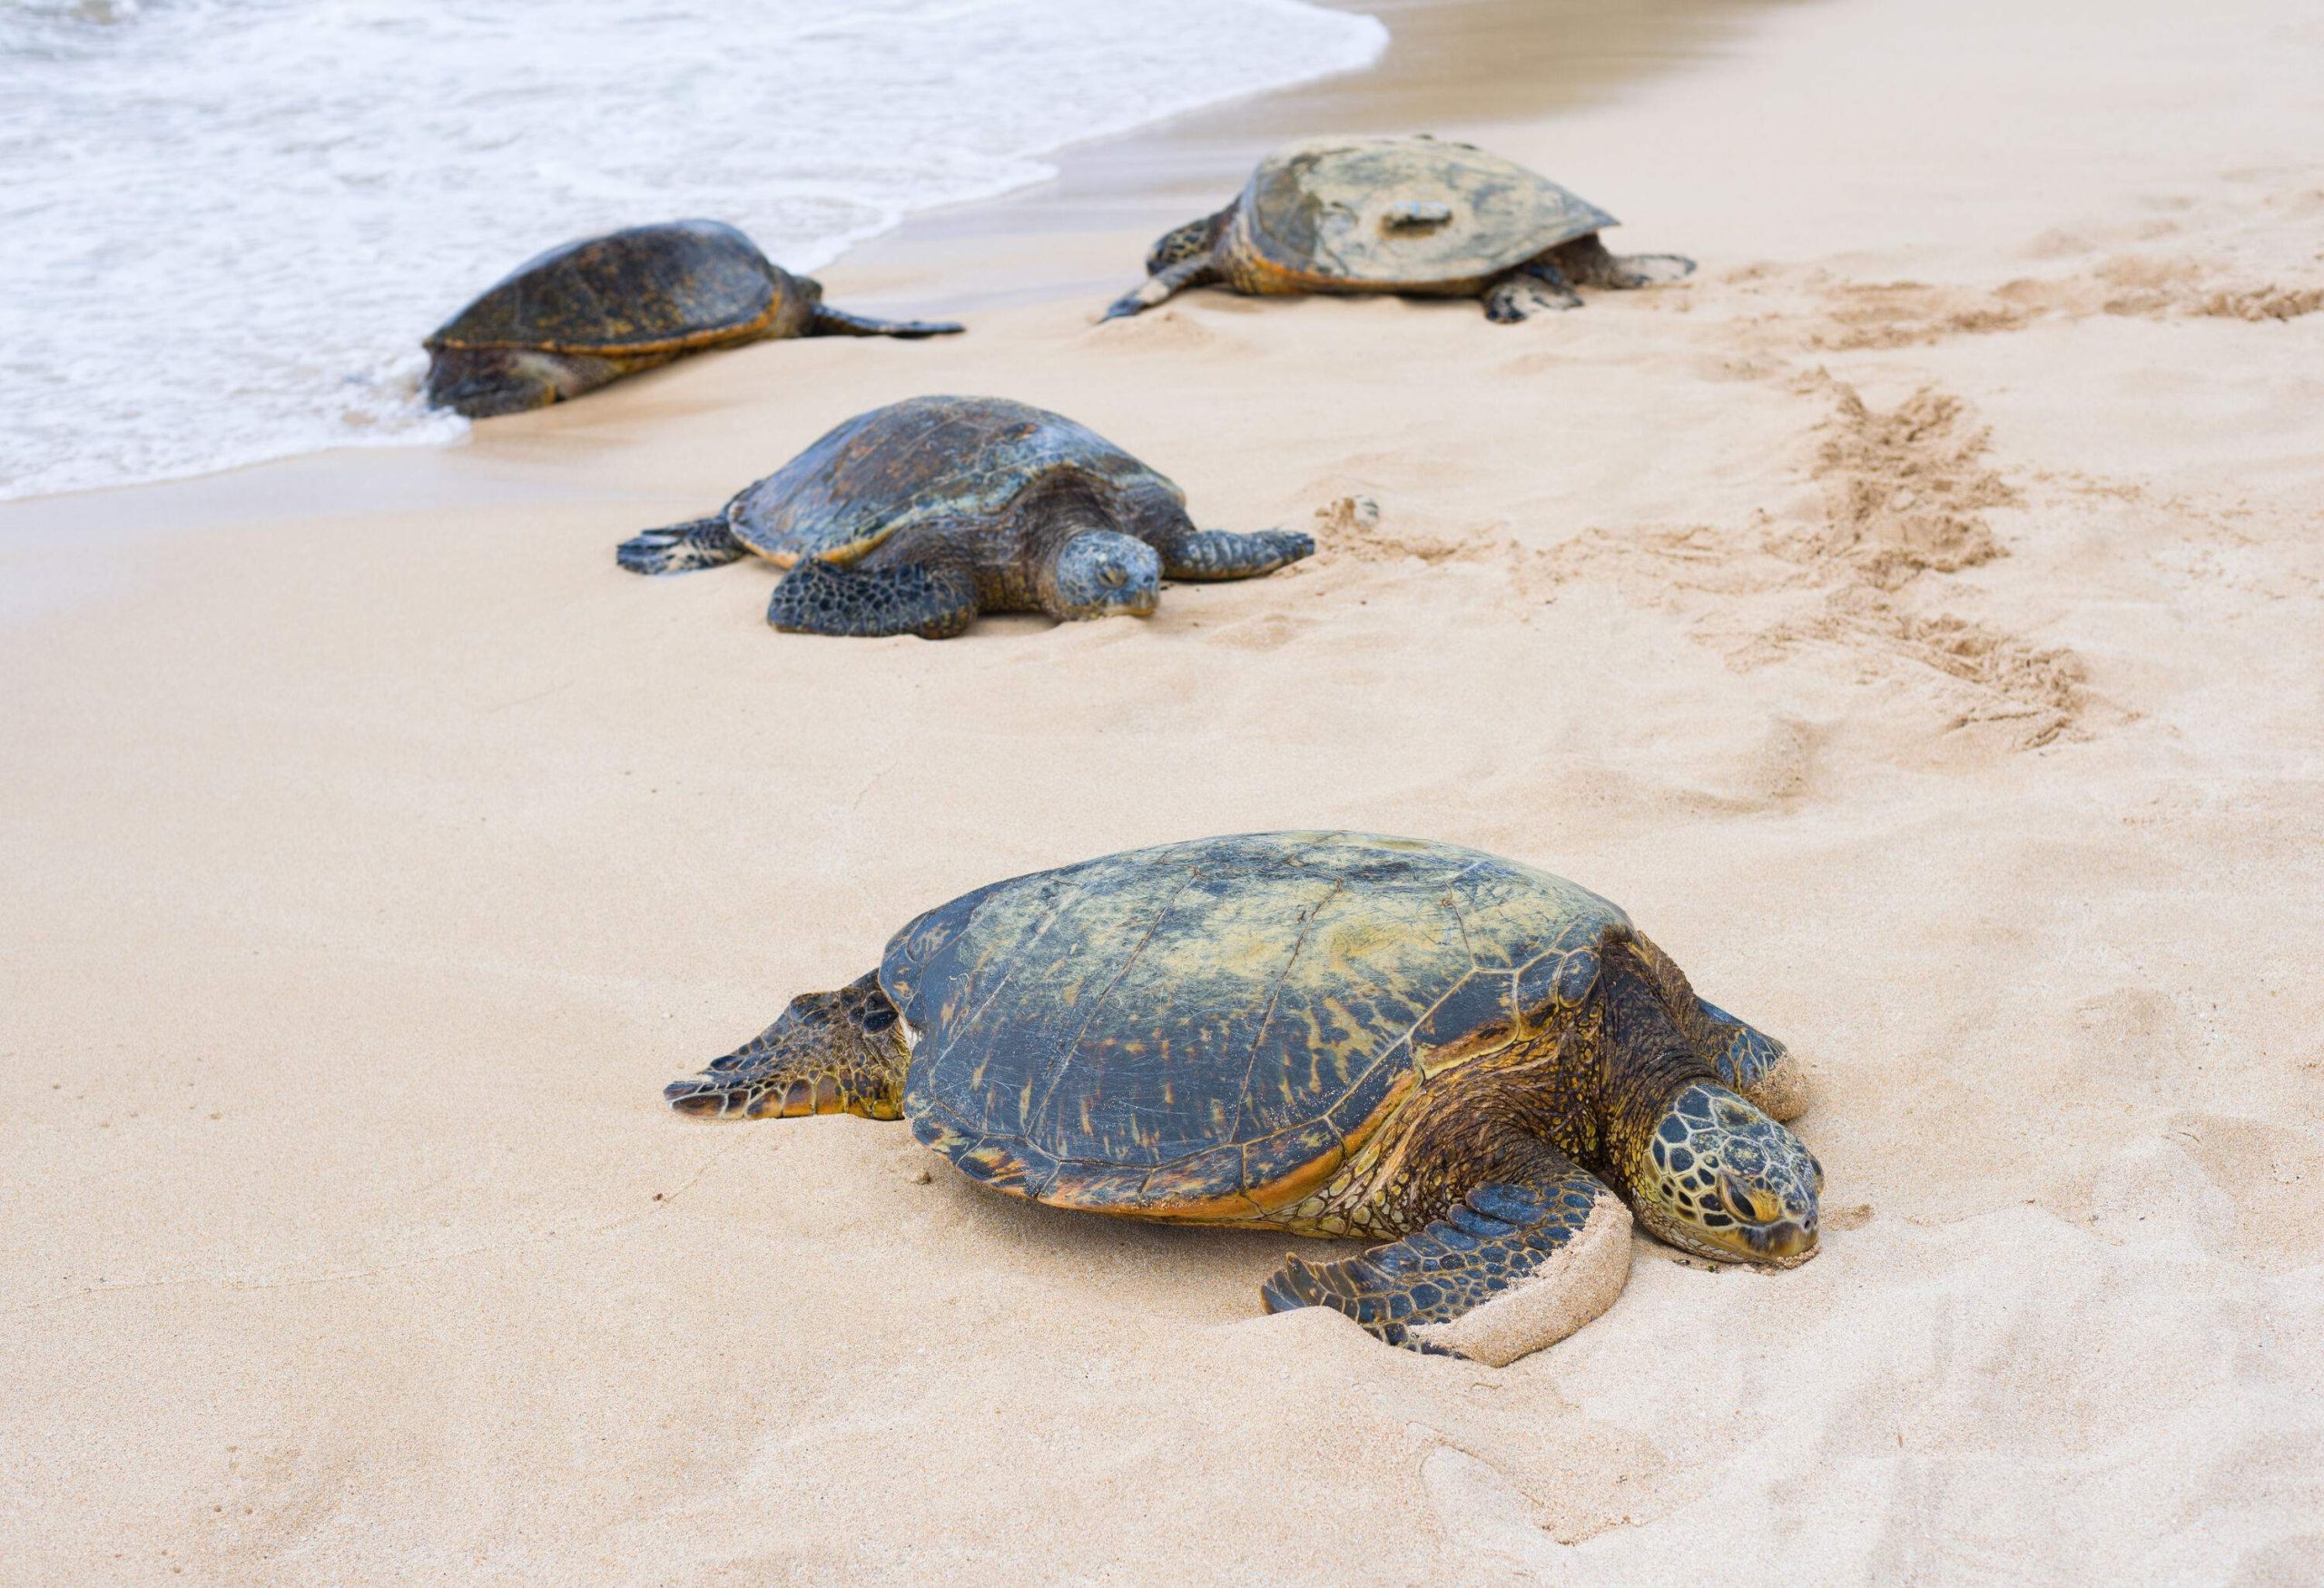 A bale of green sea turtles resting on a beach.